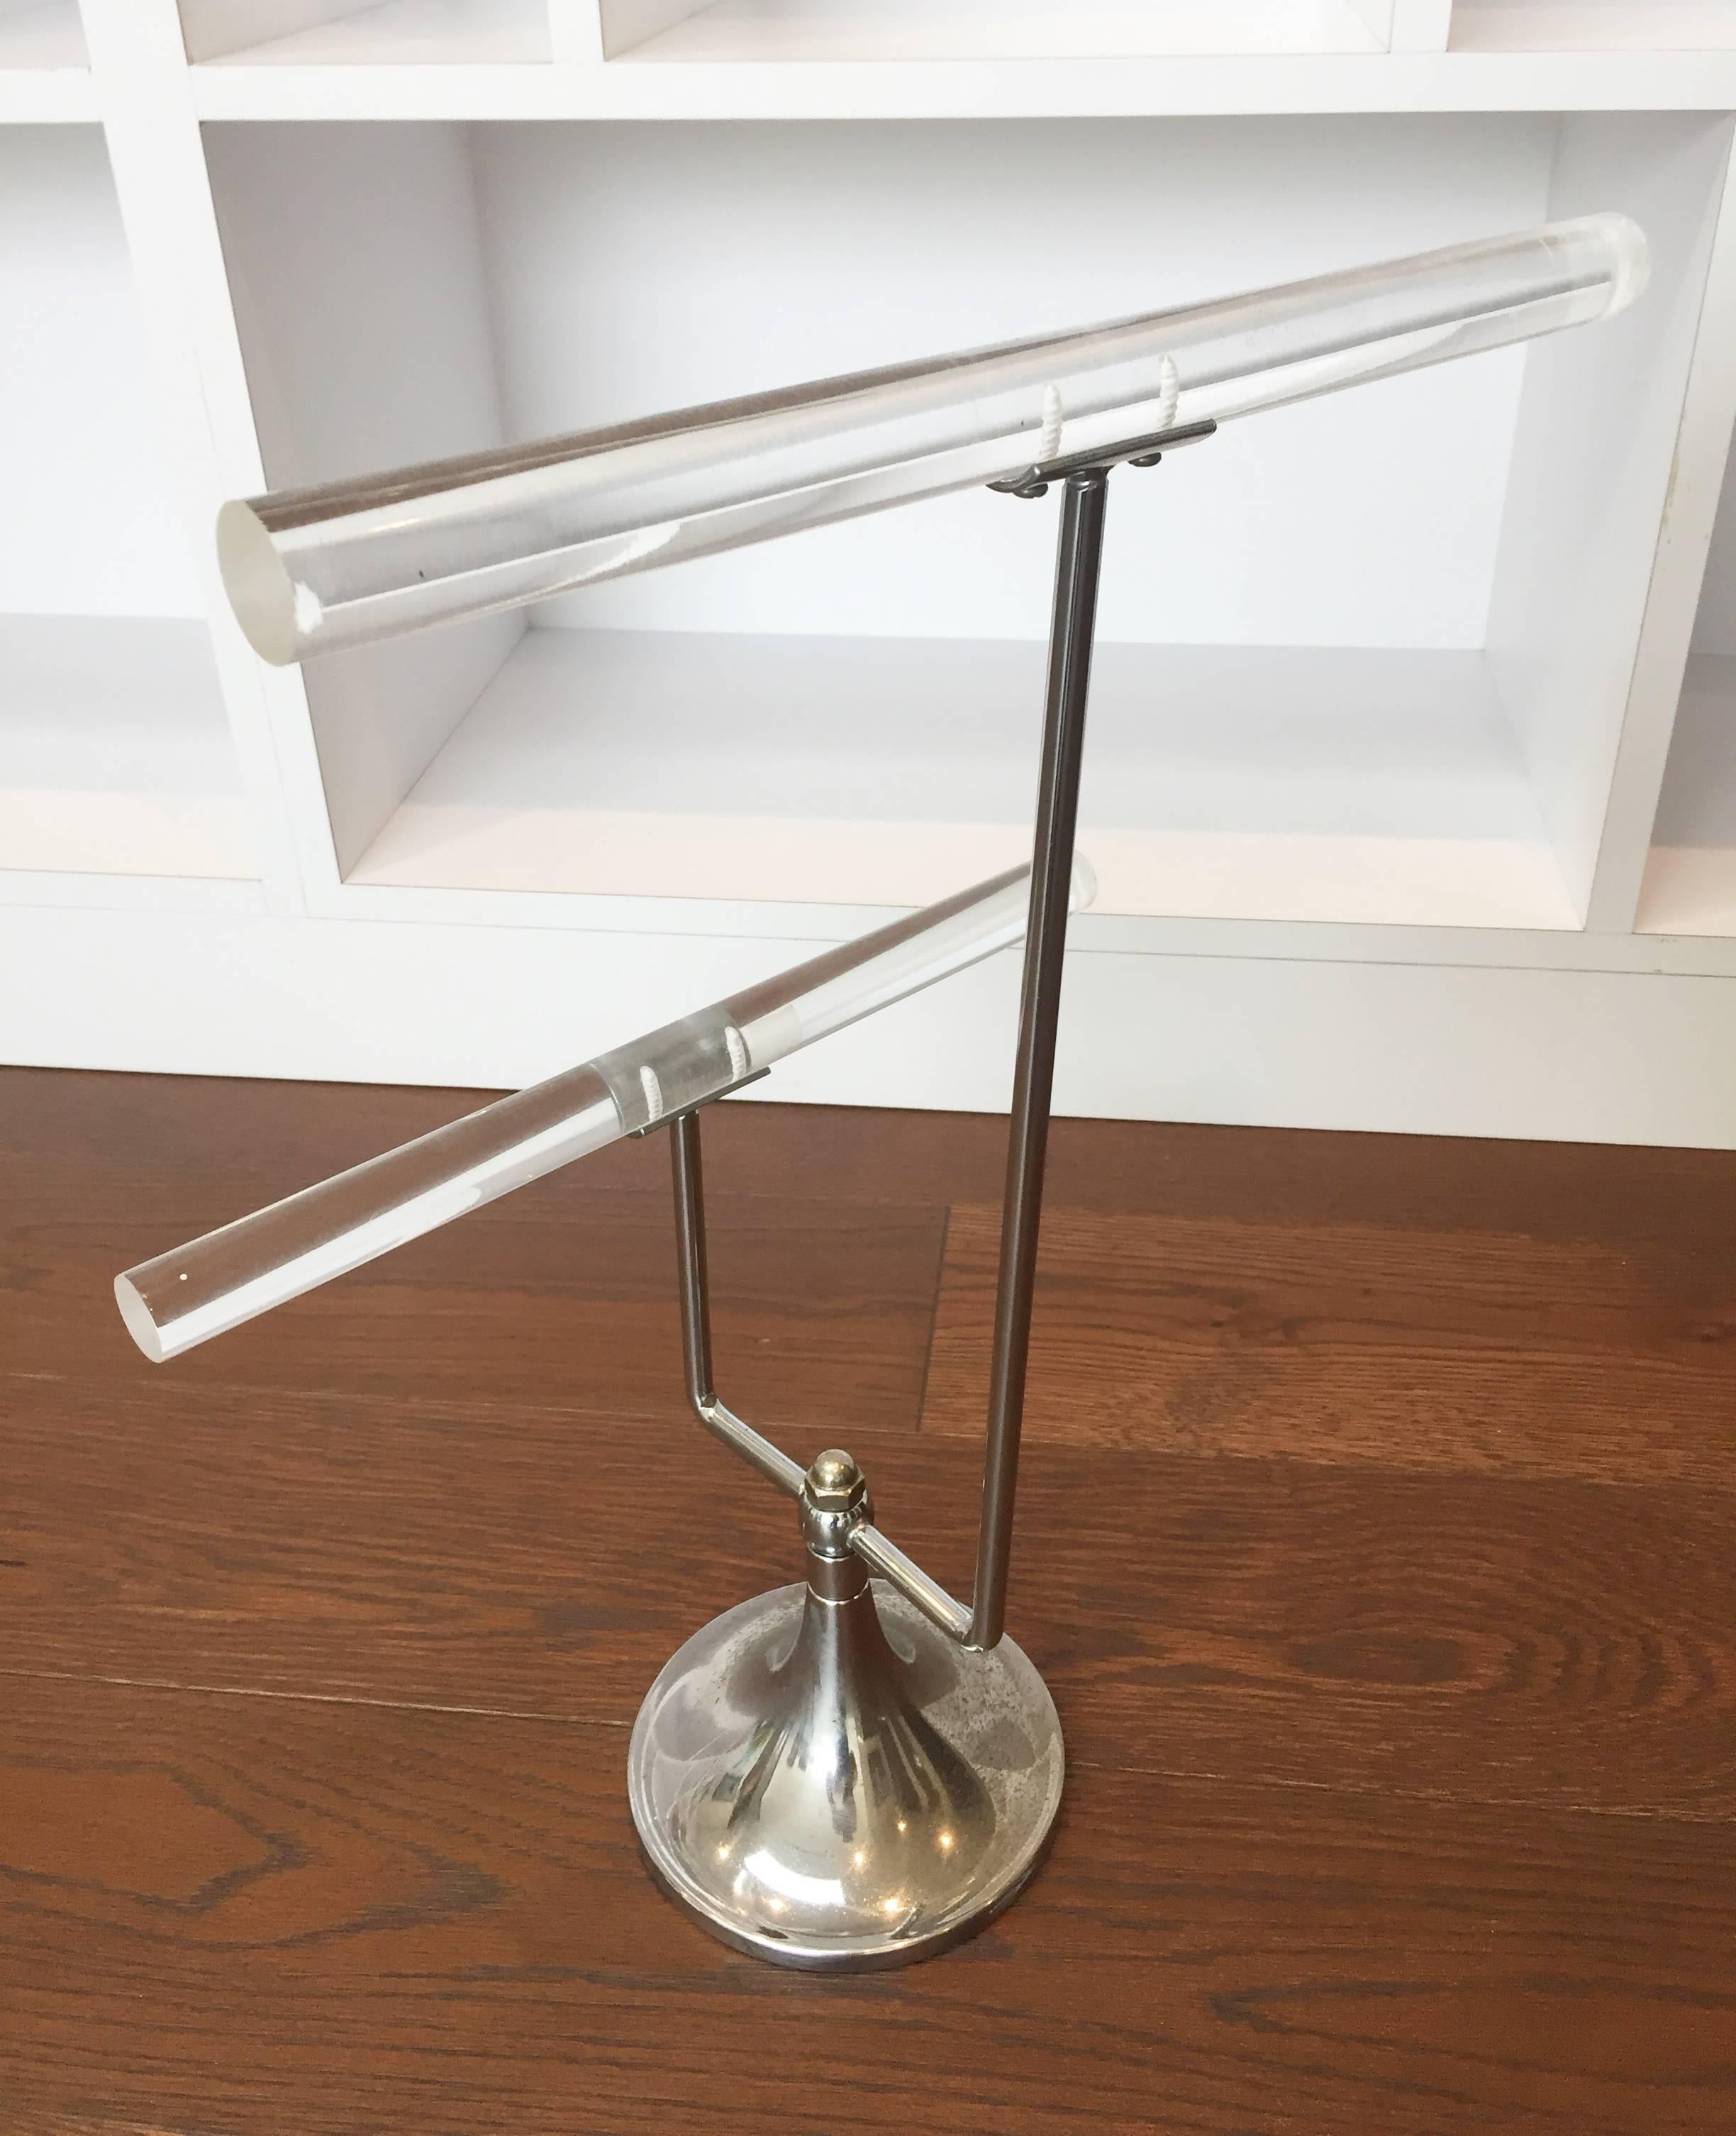 Fantastic jewelry or accessory holder or display designed and manufactured in the 1960s by Charles Hollis Jones.
The piece is made of a combination of Lucite, and polished nickel.
The piece is in very good original condition with minor signs of